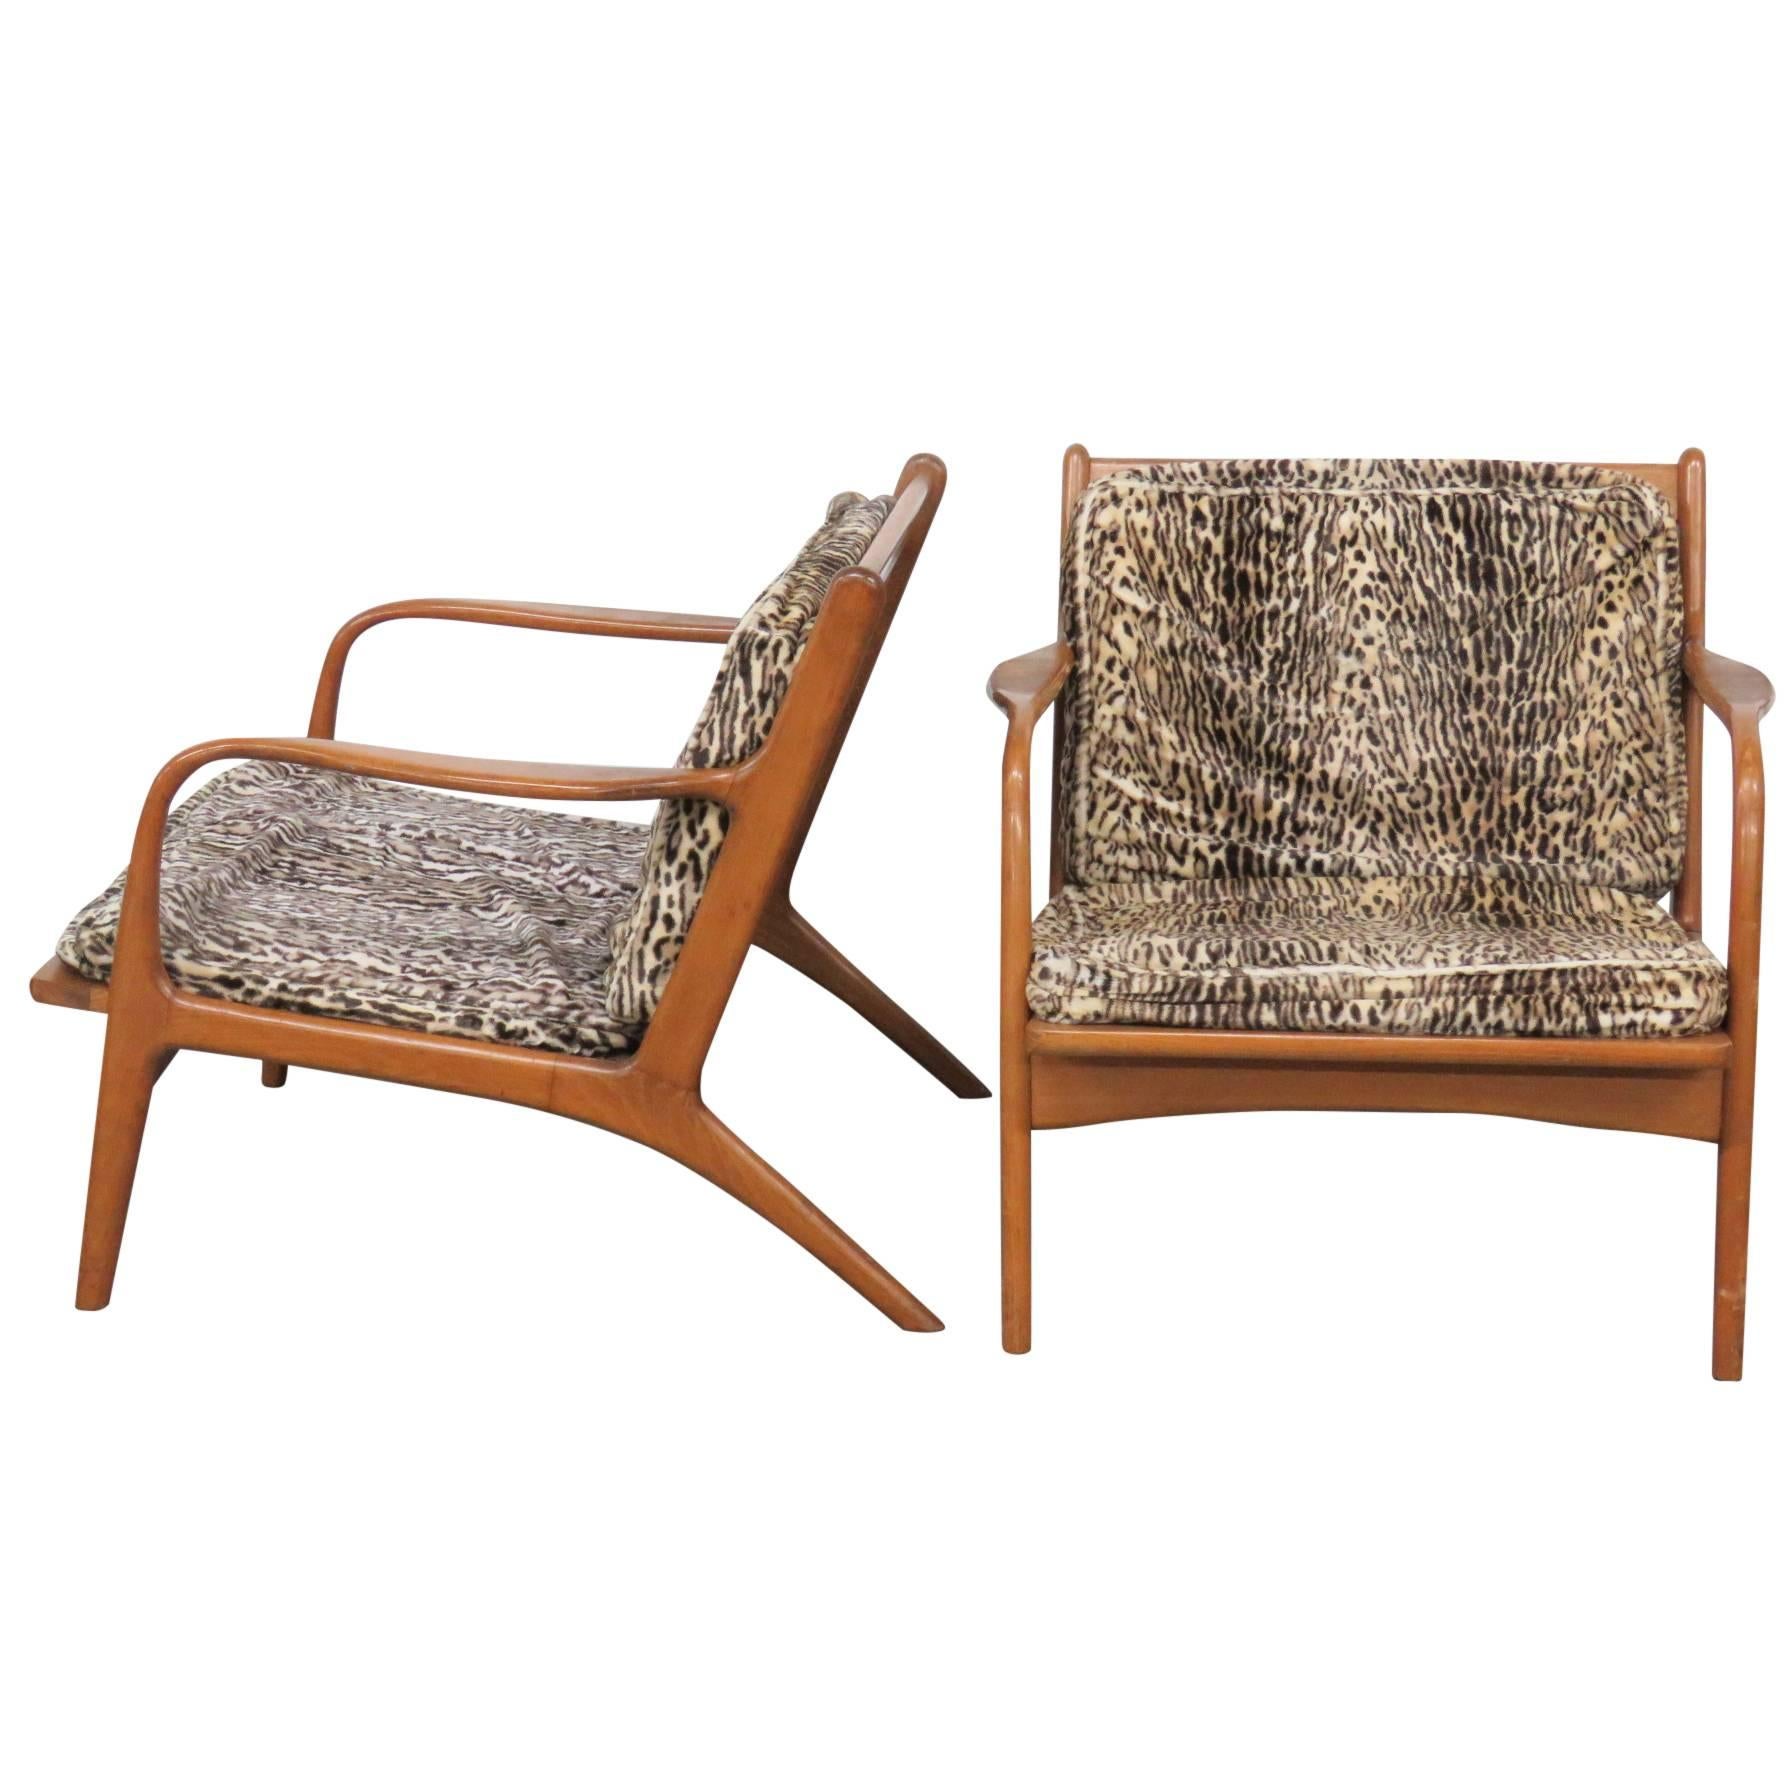 Pair of Danish Modern Leopard Upholstered Lounge Chairs